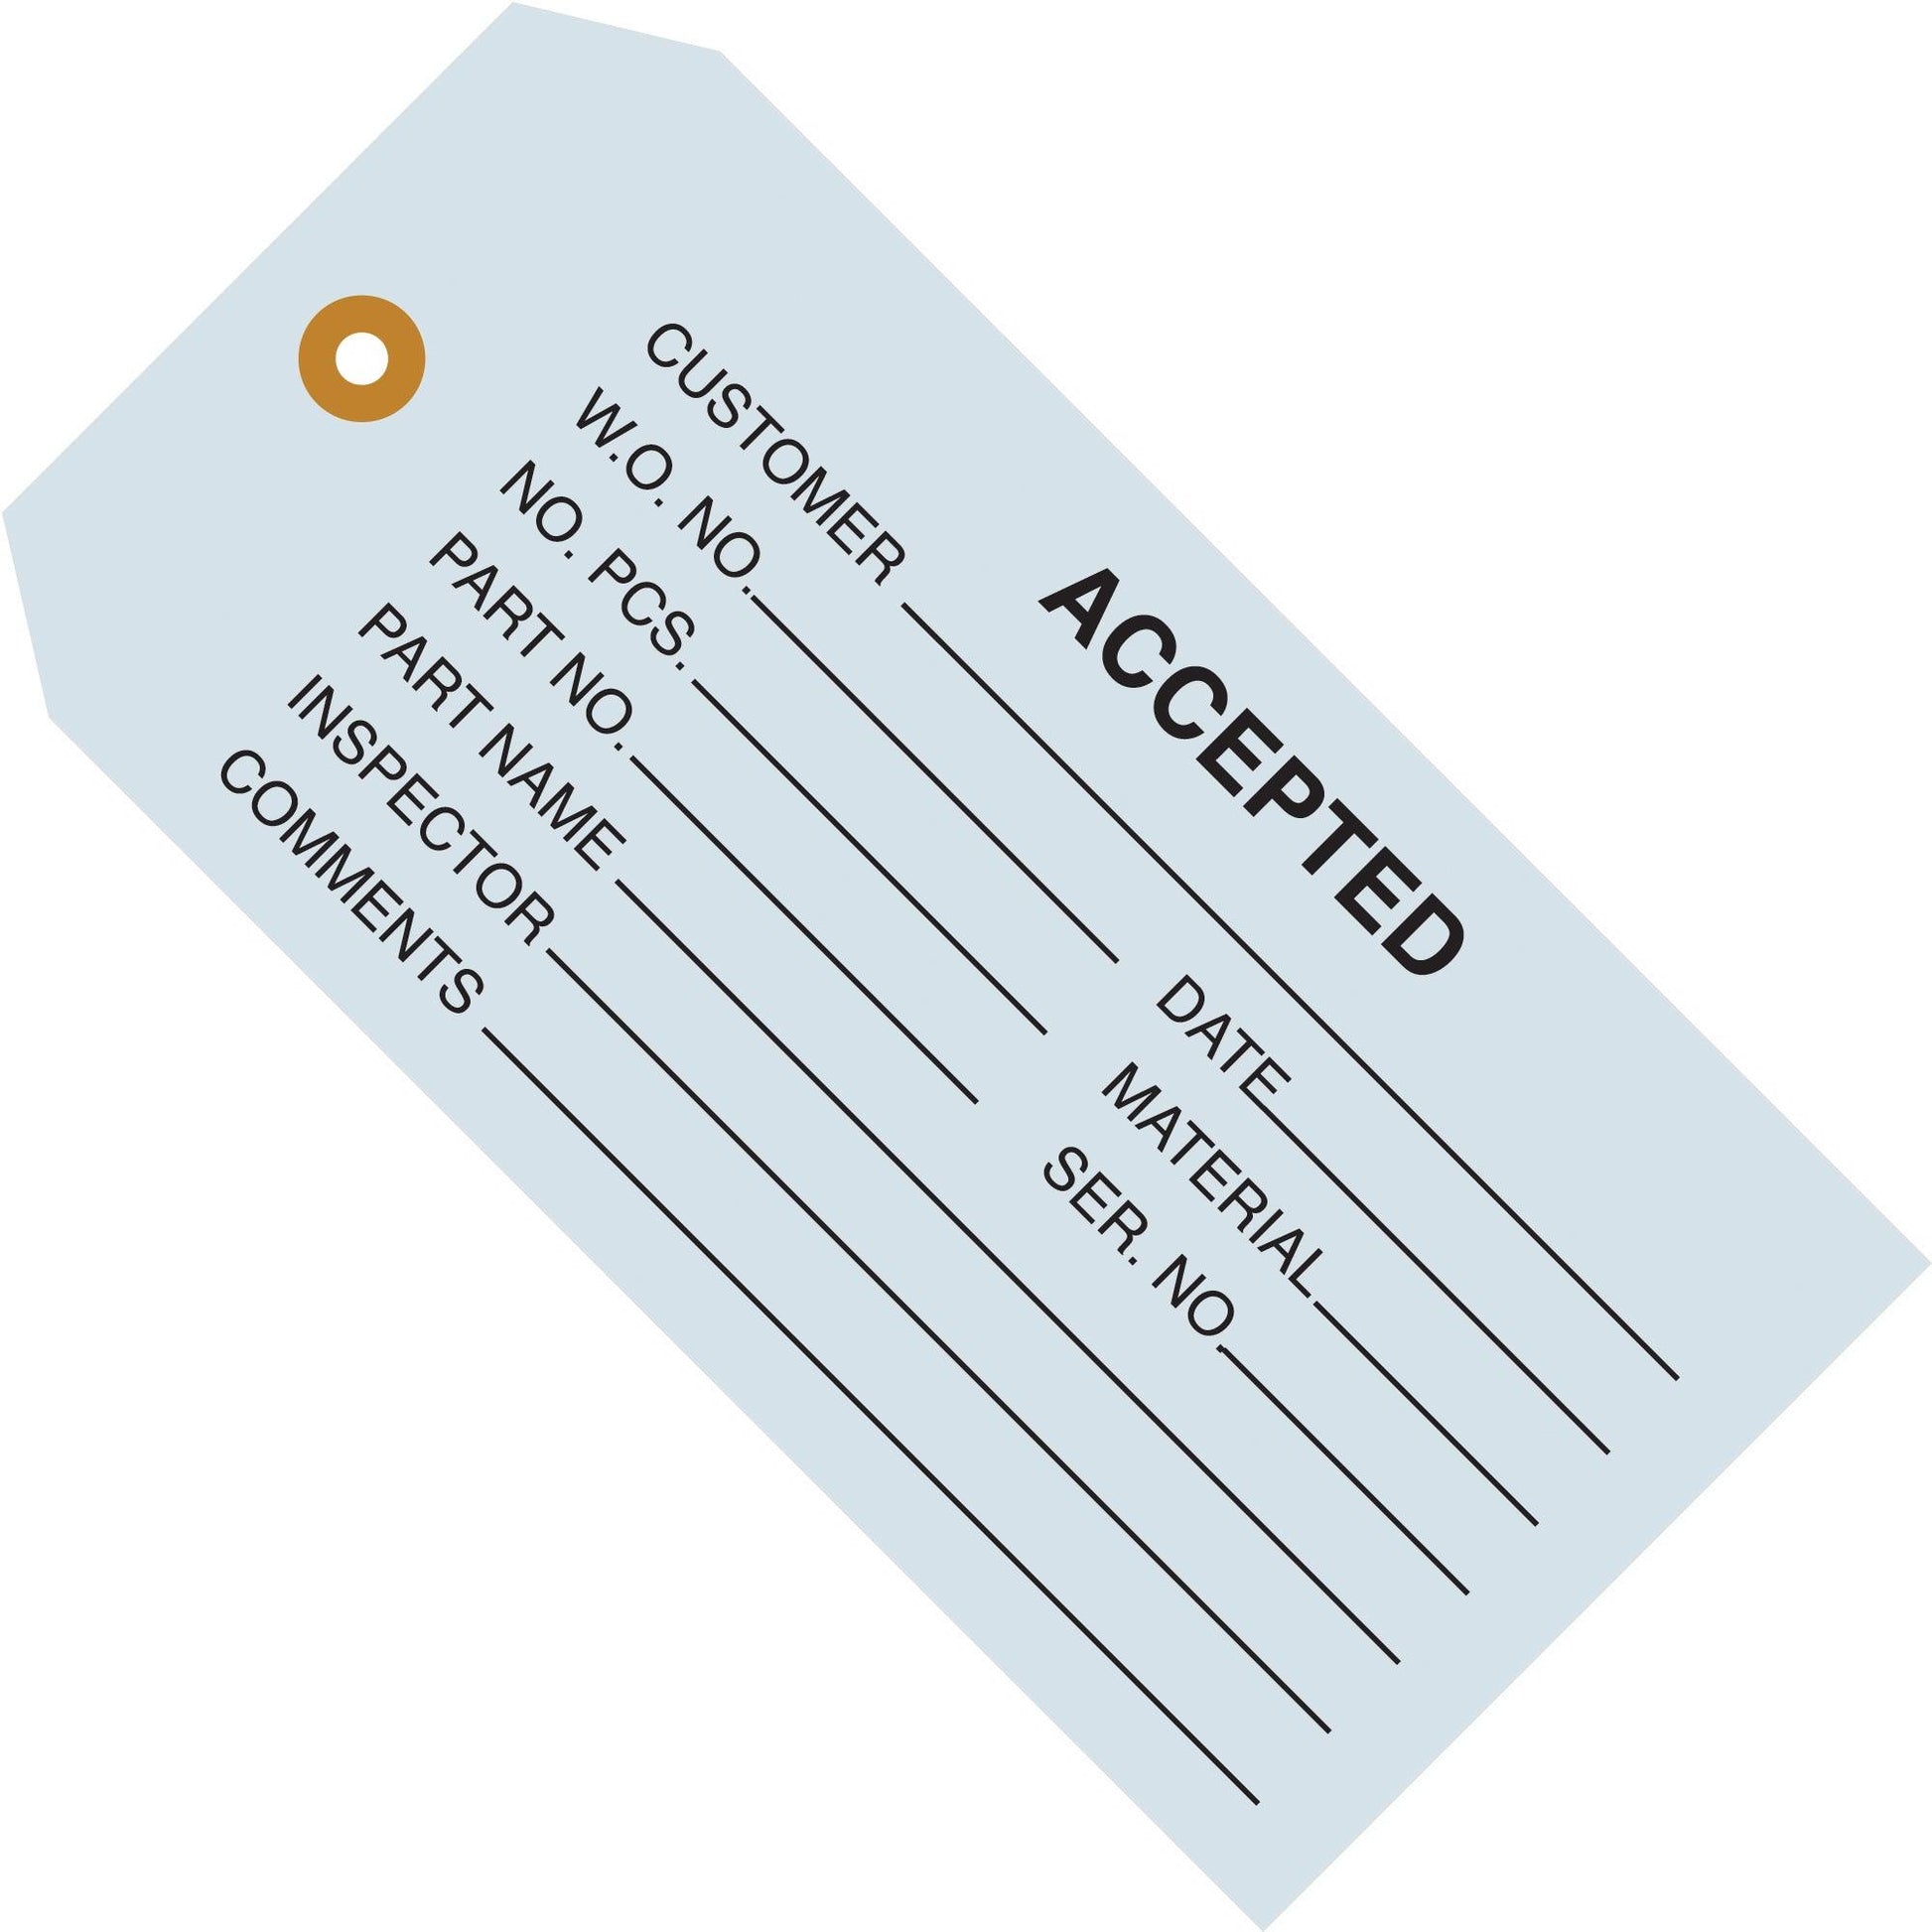 4 3/4 x 2 3/8" - "Accepted (Blue)" Inspection Tags - G20011